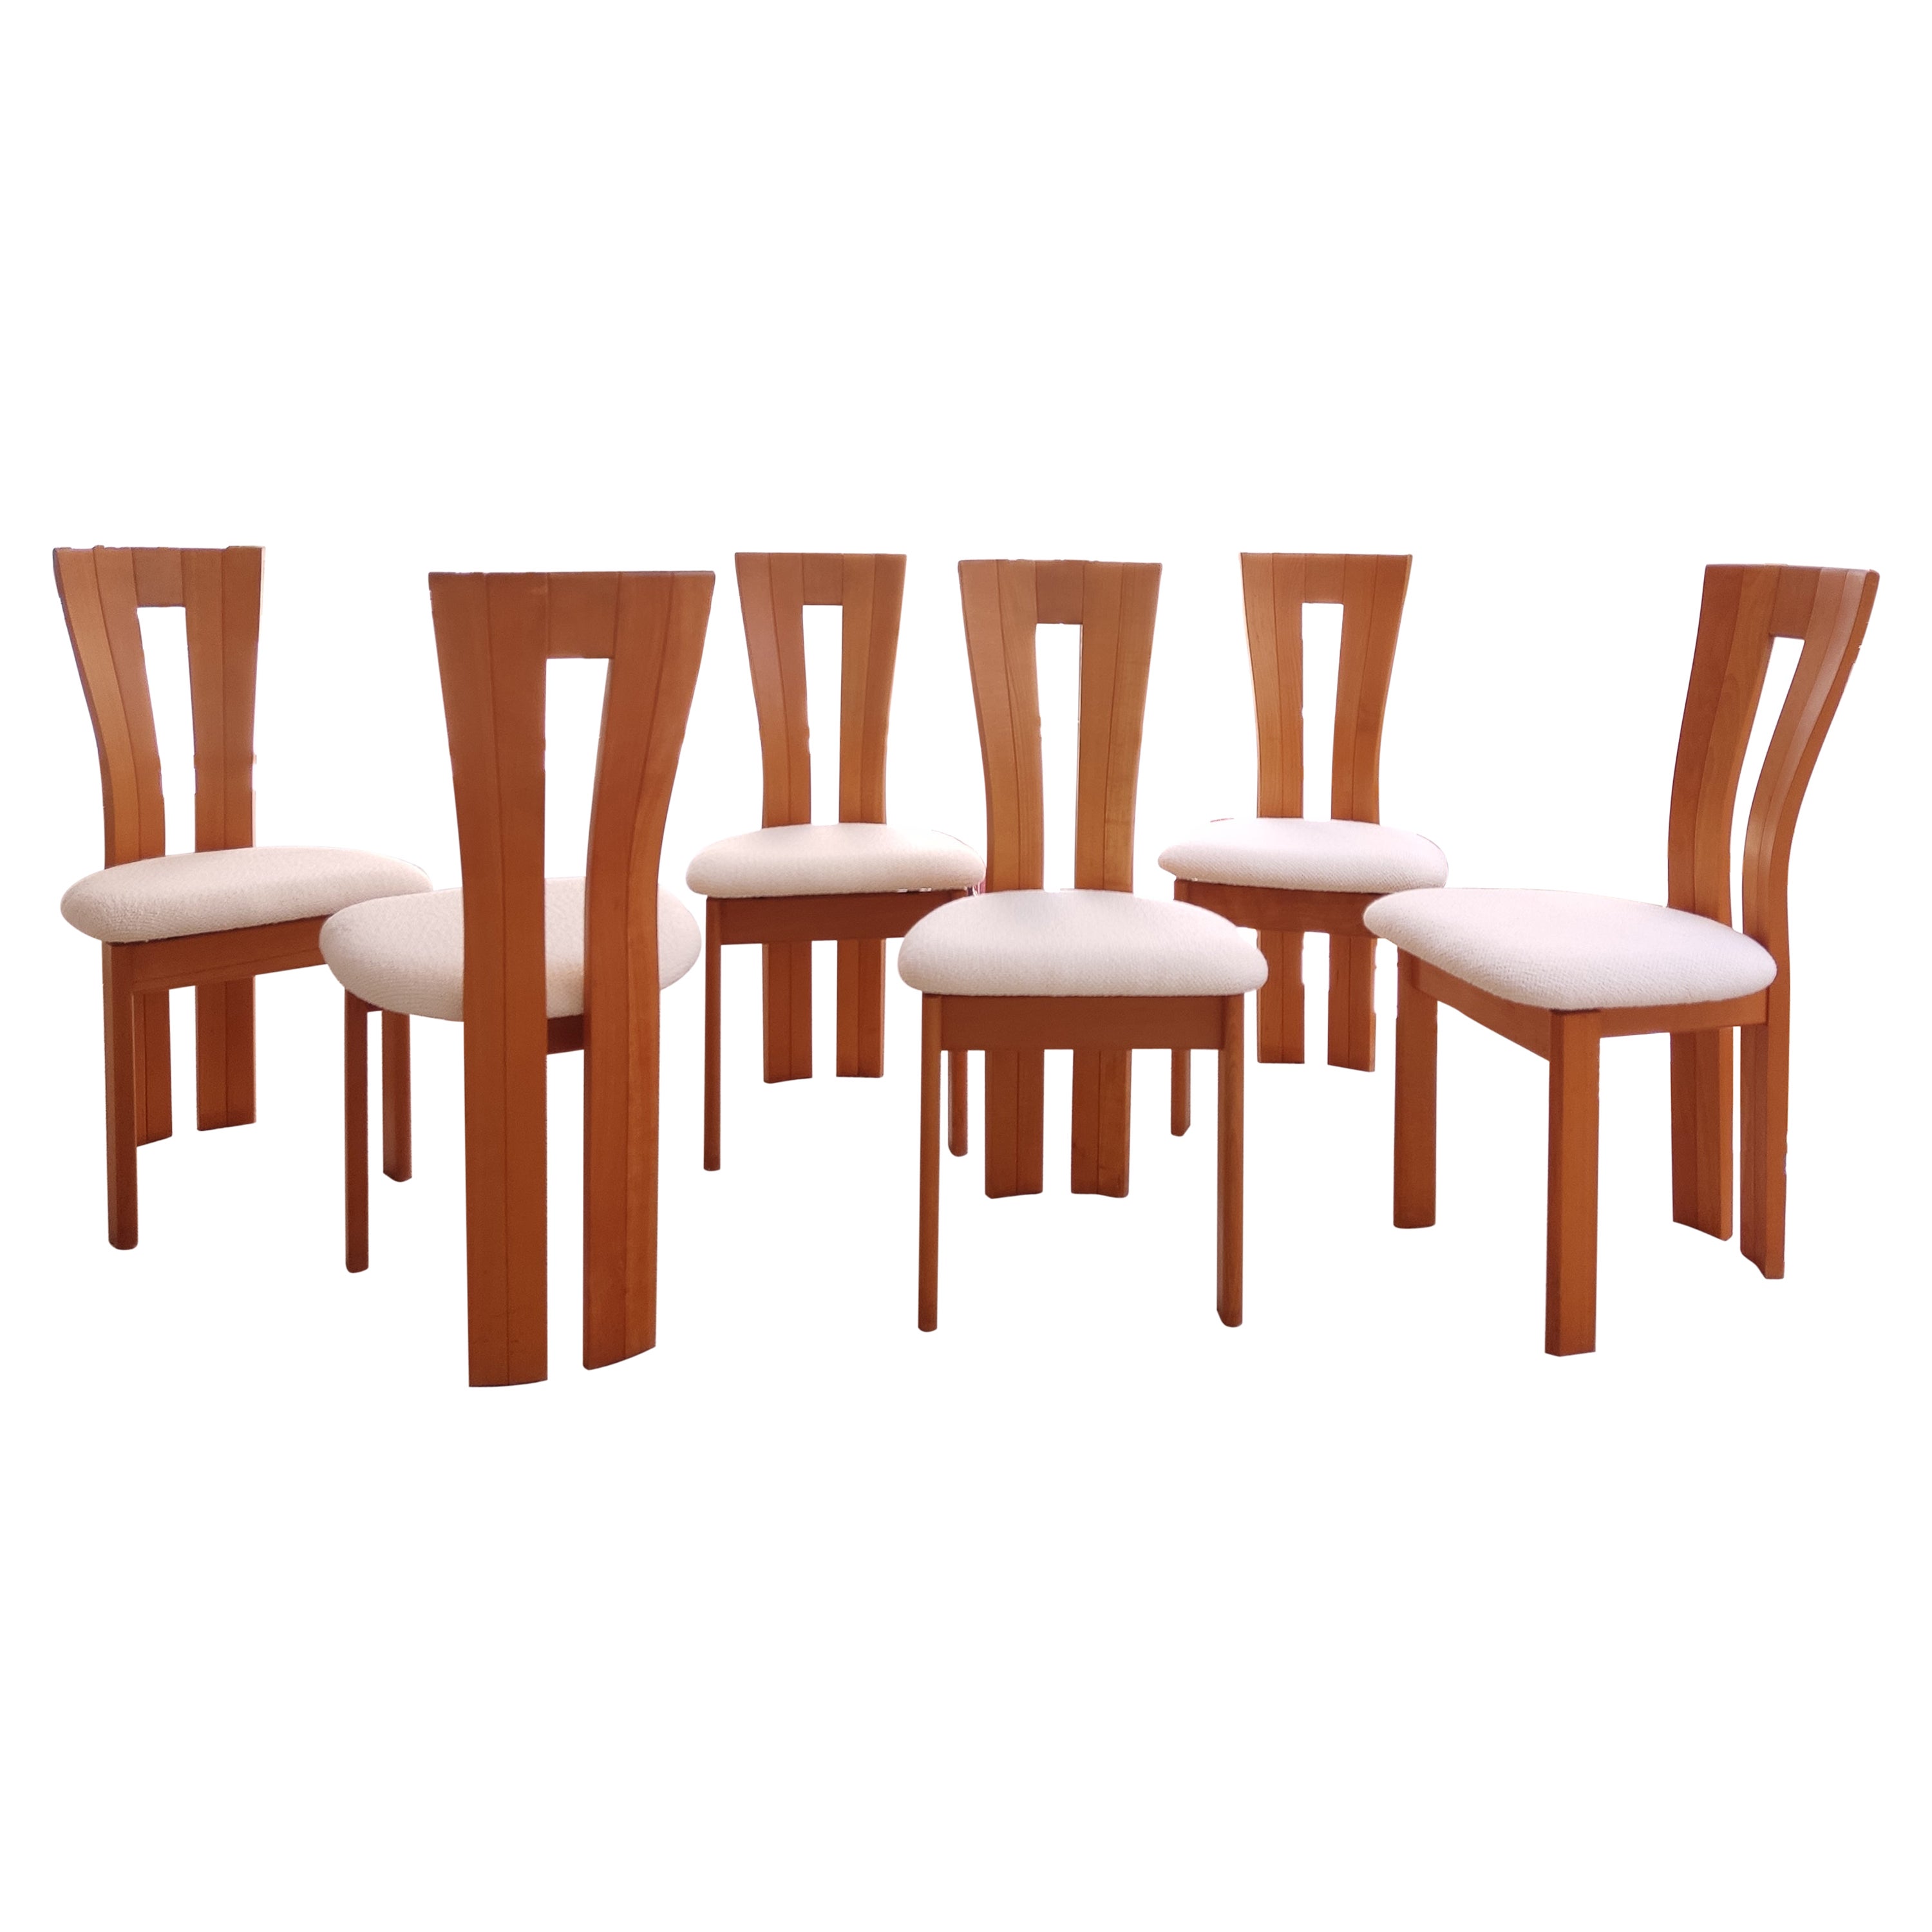 6 Woods and Bouclé Chairs For Sale